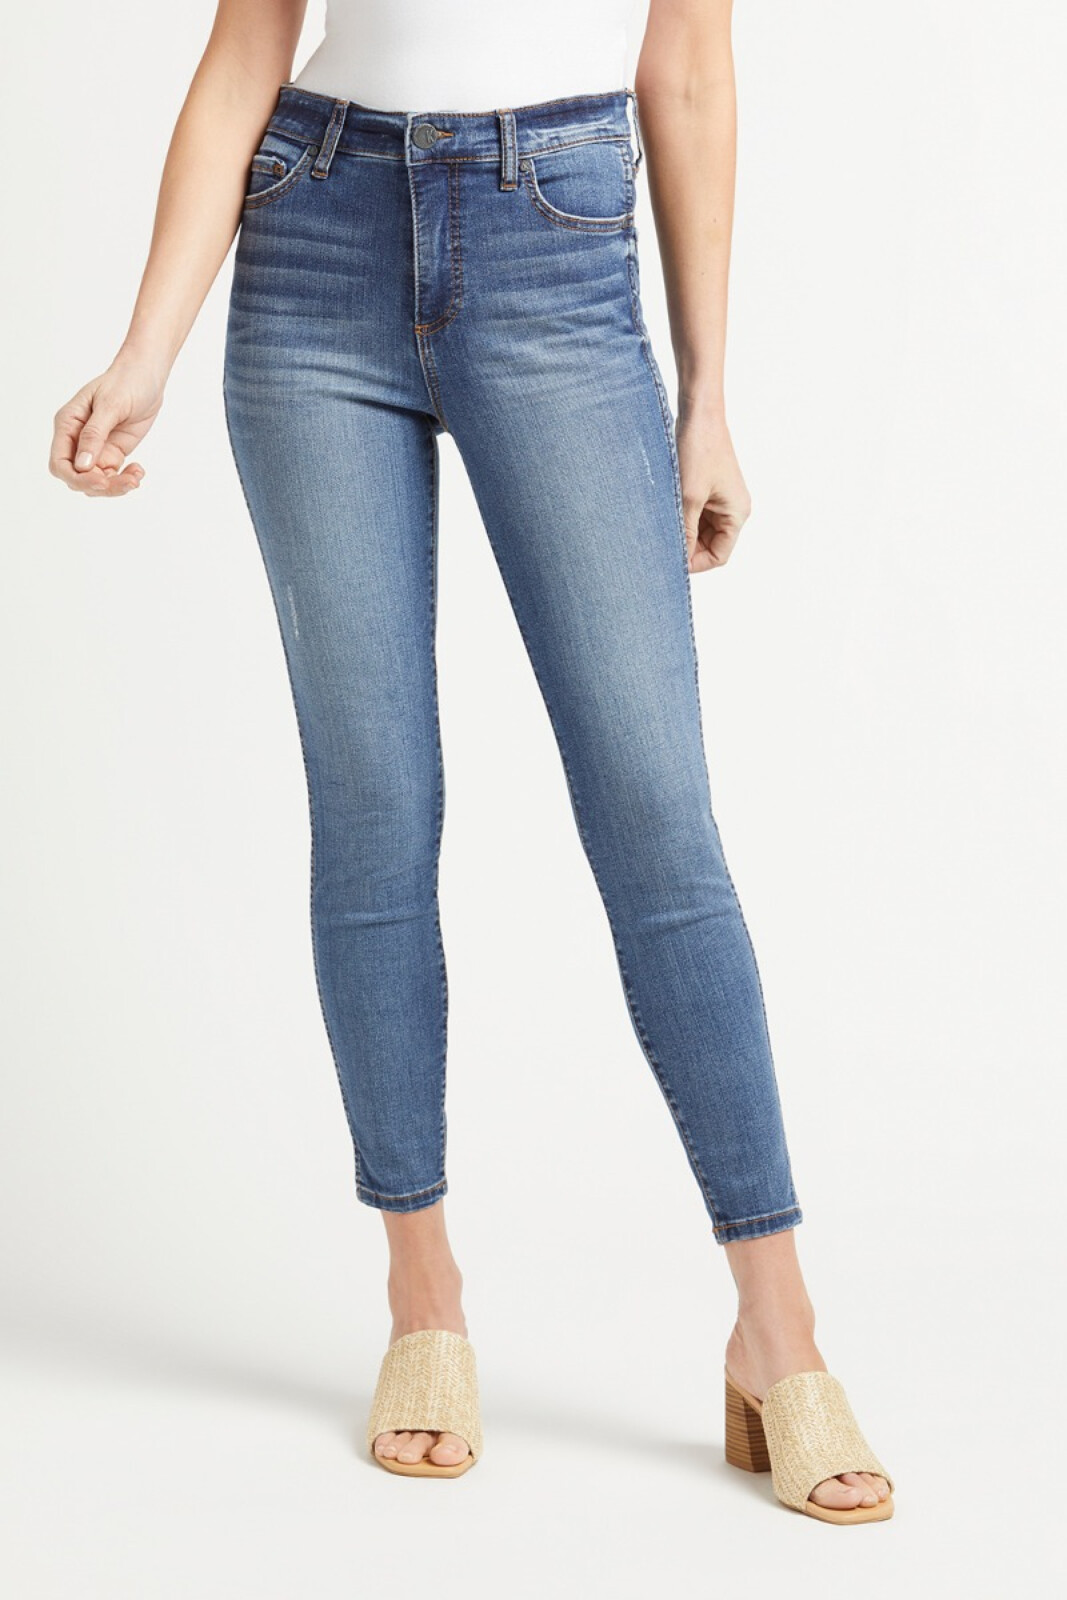 KUT FROM THE KLOTH Connie Ankle Skinny | EVEREVE